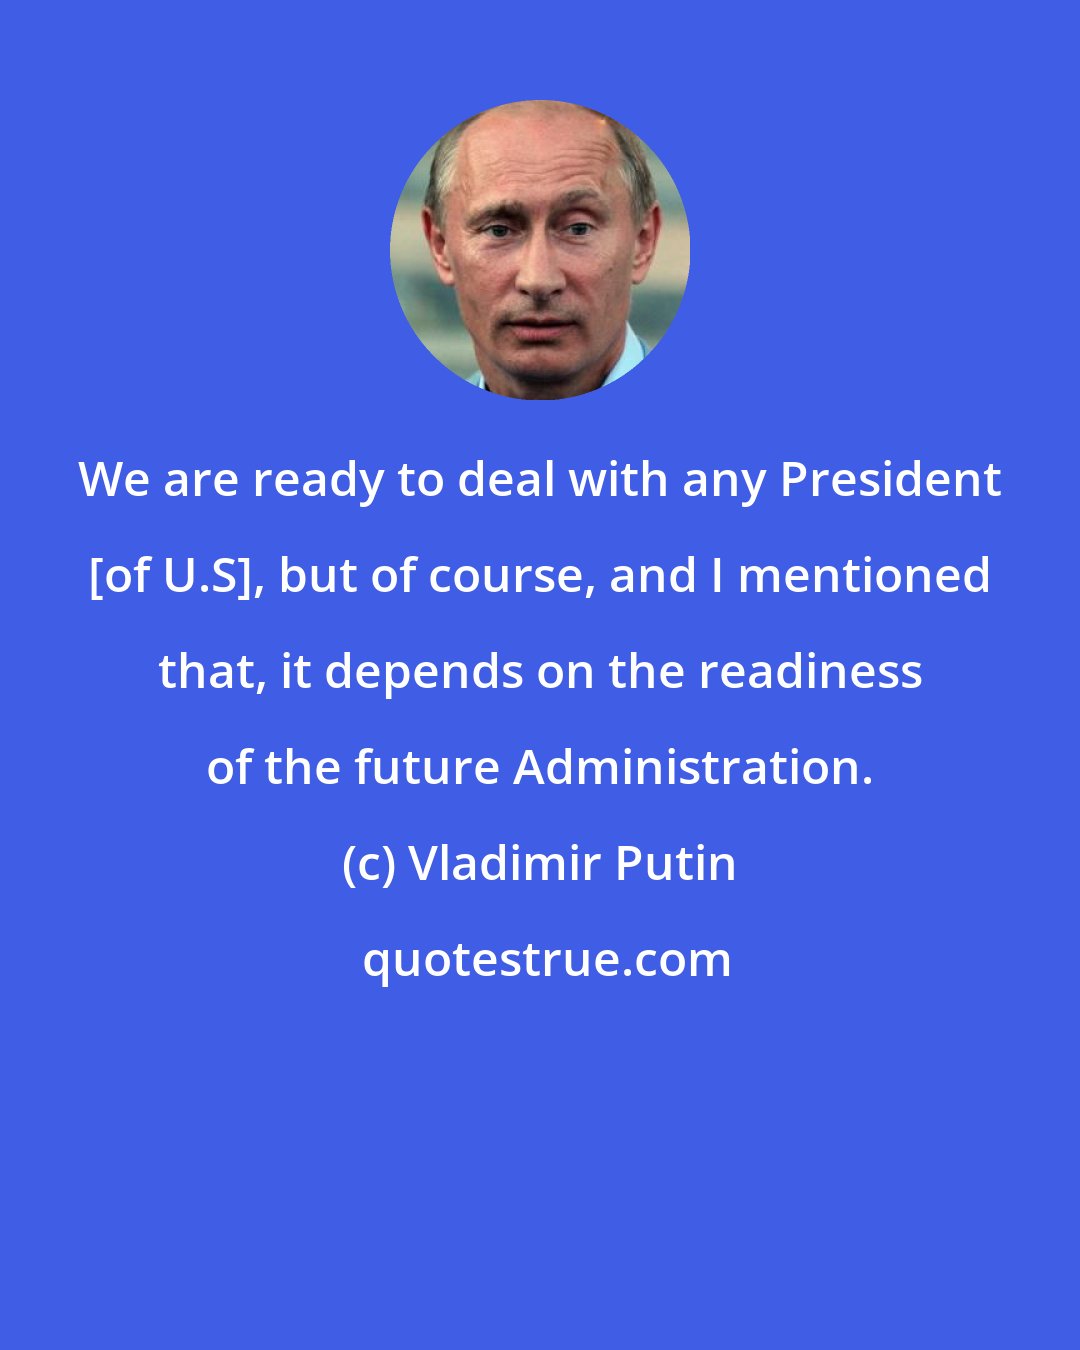 Vladimir Putin: We are ready to deal with any President [of U.S], but of course, and I mentioned that, it depends on the readiness of the future Administration.